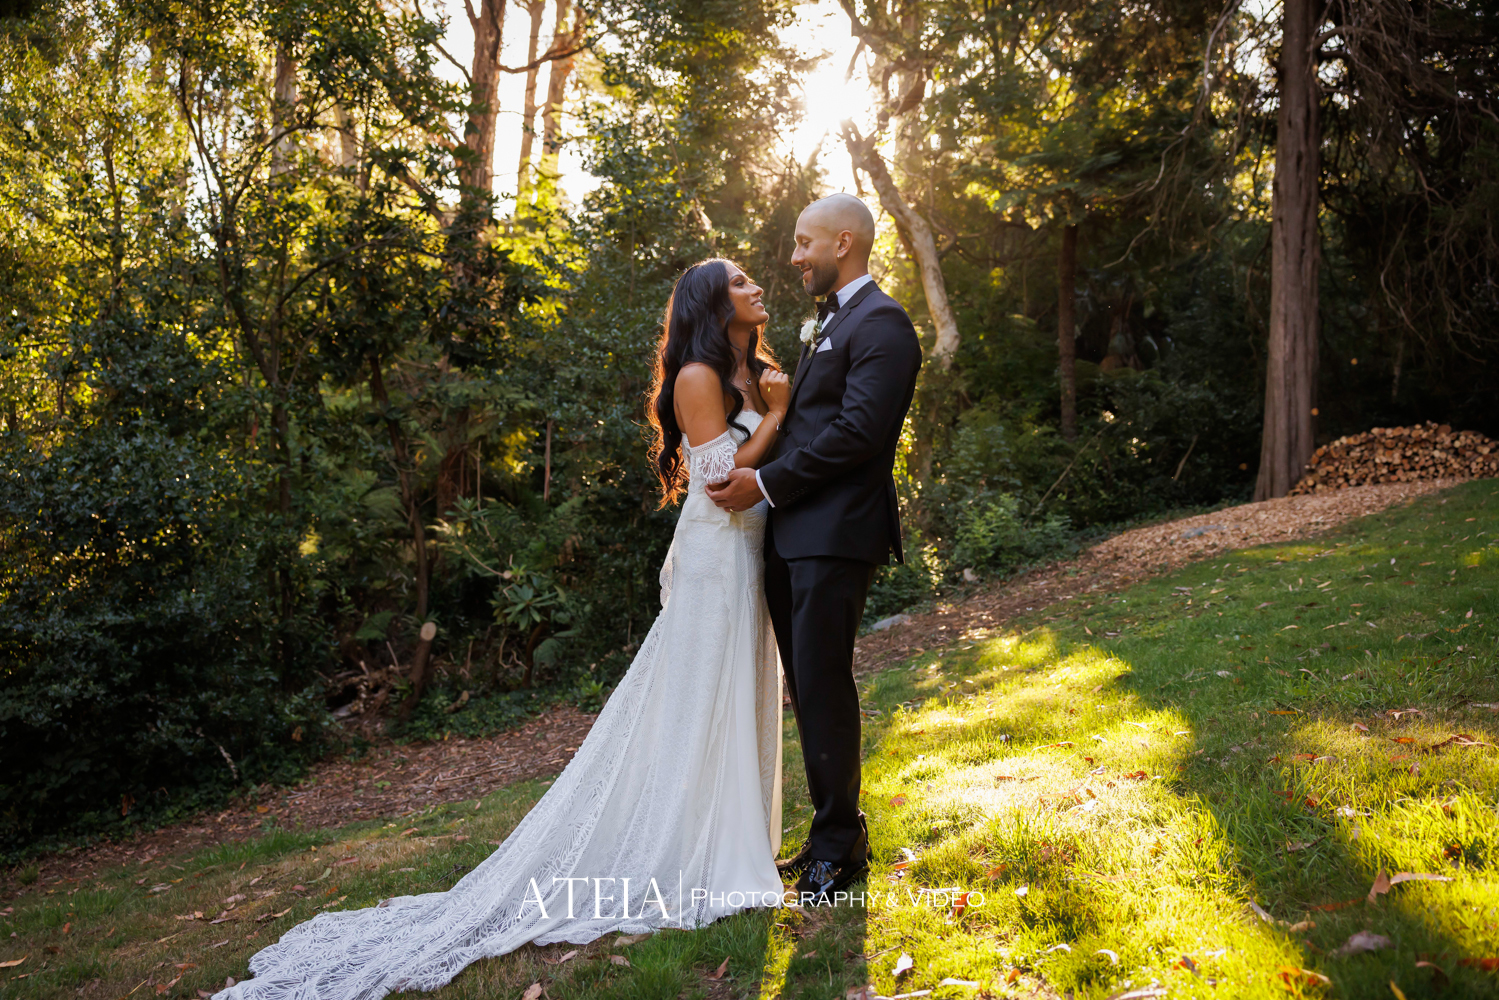 , Amanda and Brandon wedding photography in Melbourne at Tatra Receptions by ATEIA Photography &#038; Video